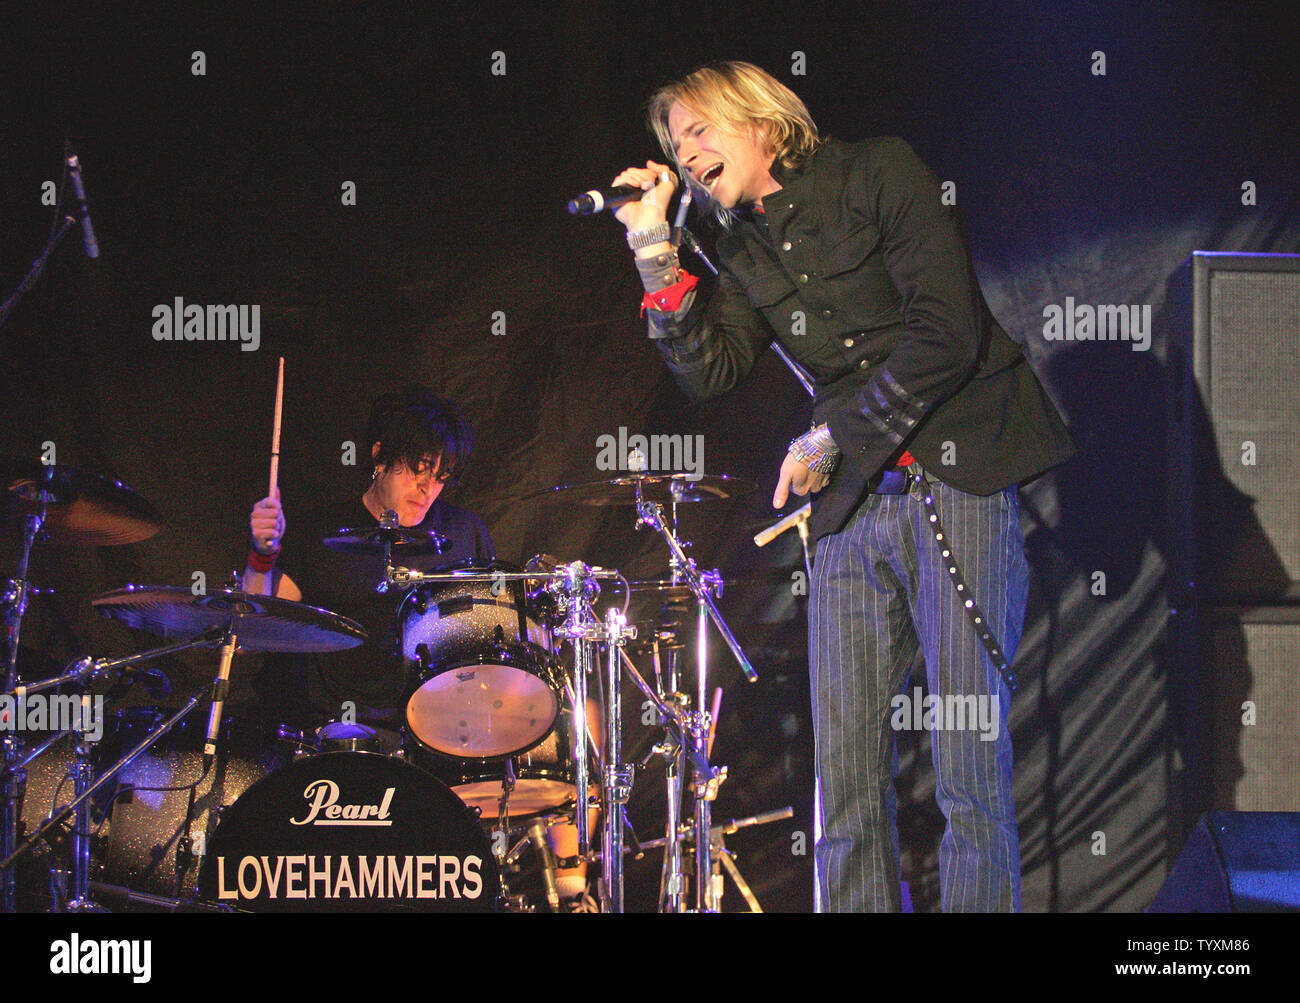 Bobby Kourelis (L) and Marty Casey of the rock group Marty Casey and Lovehammers perform in concert at the Pala Indian Reservation and Casino in Pala, CA, on January 25, 2006. The group's self-titled debut album currently tops the charts on VH1.   (UPI Photo/Roger Williams) Stock Photo